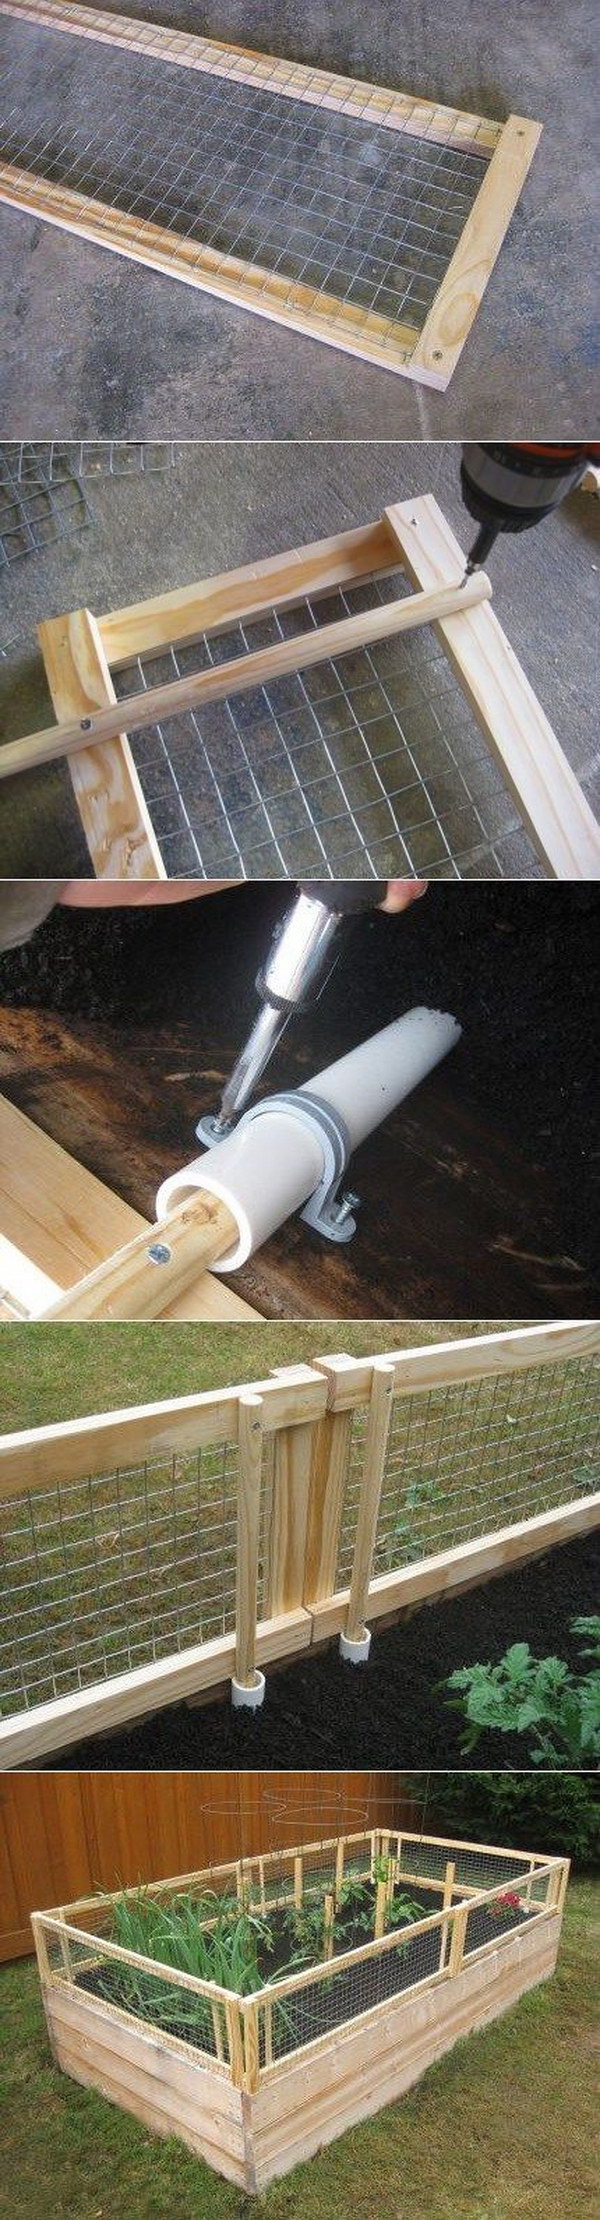 How to Make Raised Garden Bed with Removable Pest Gate. 